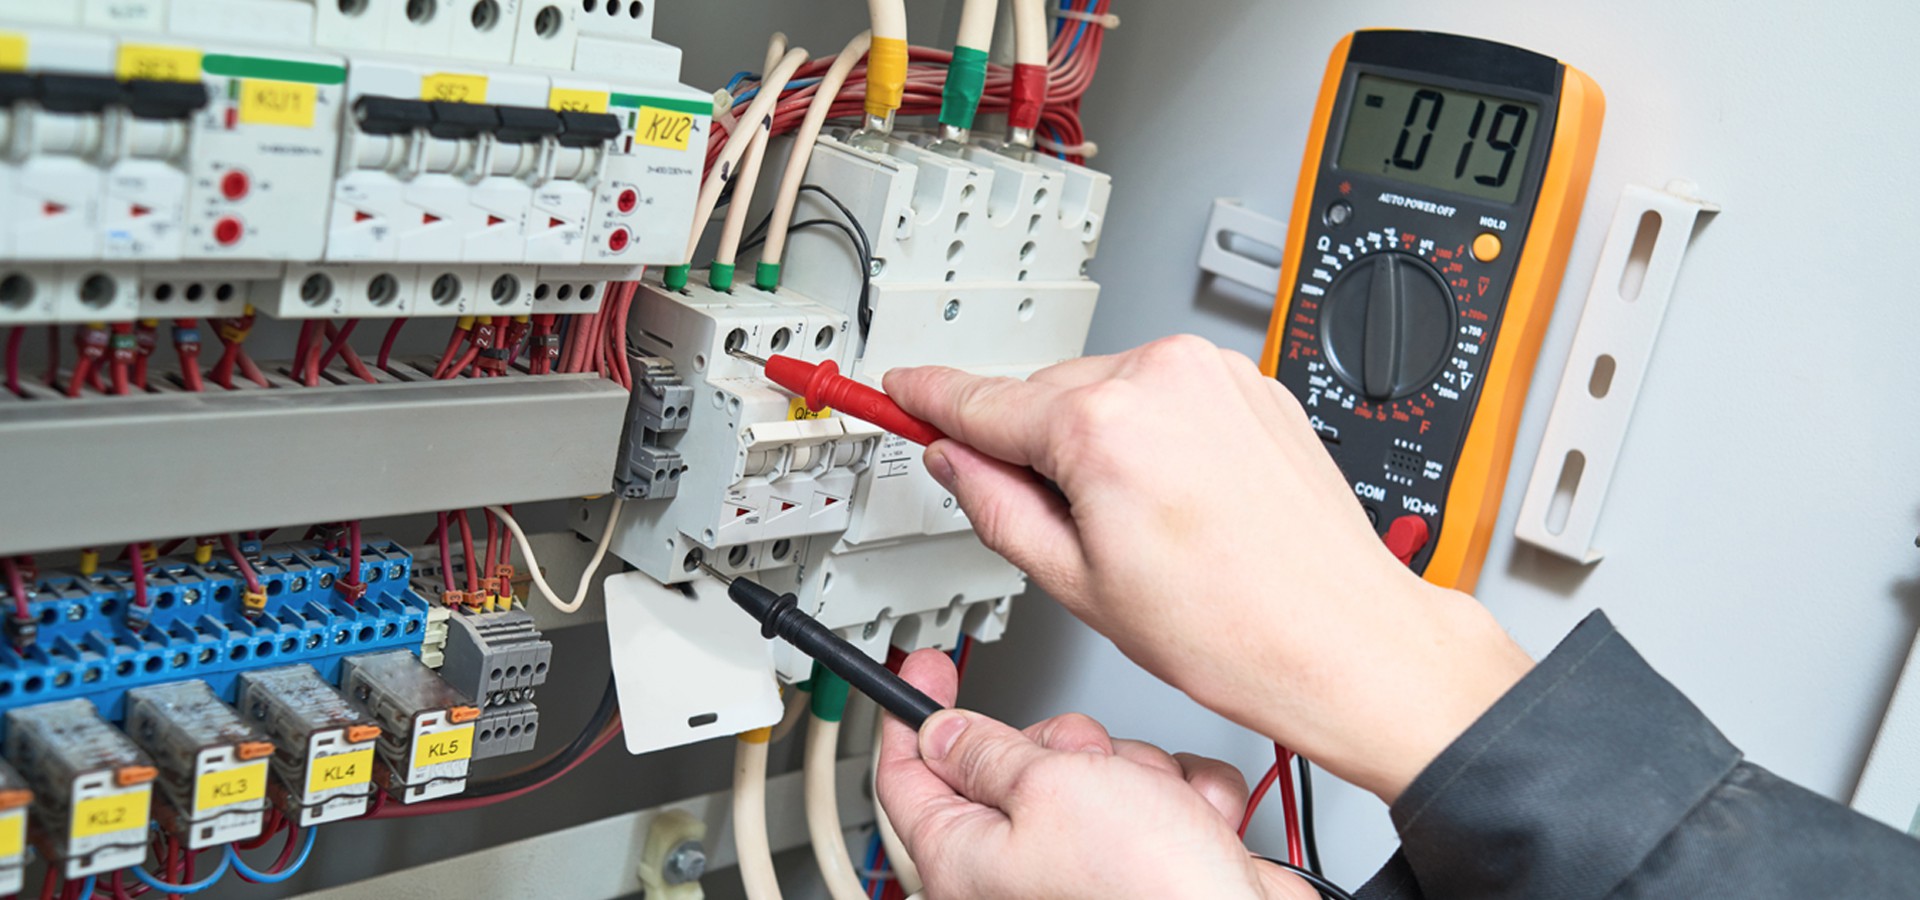 ElectricalSolutions-img01.jpg